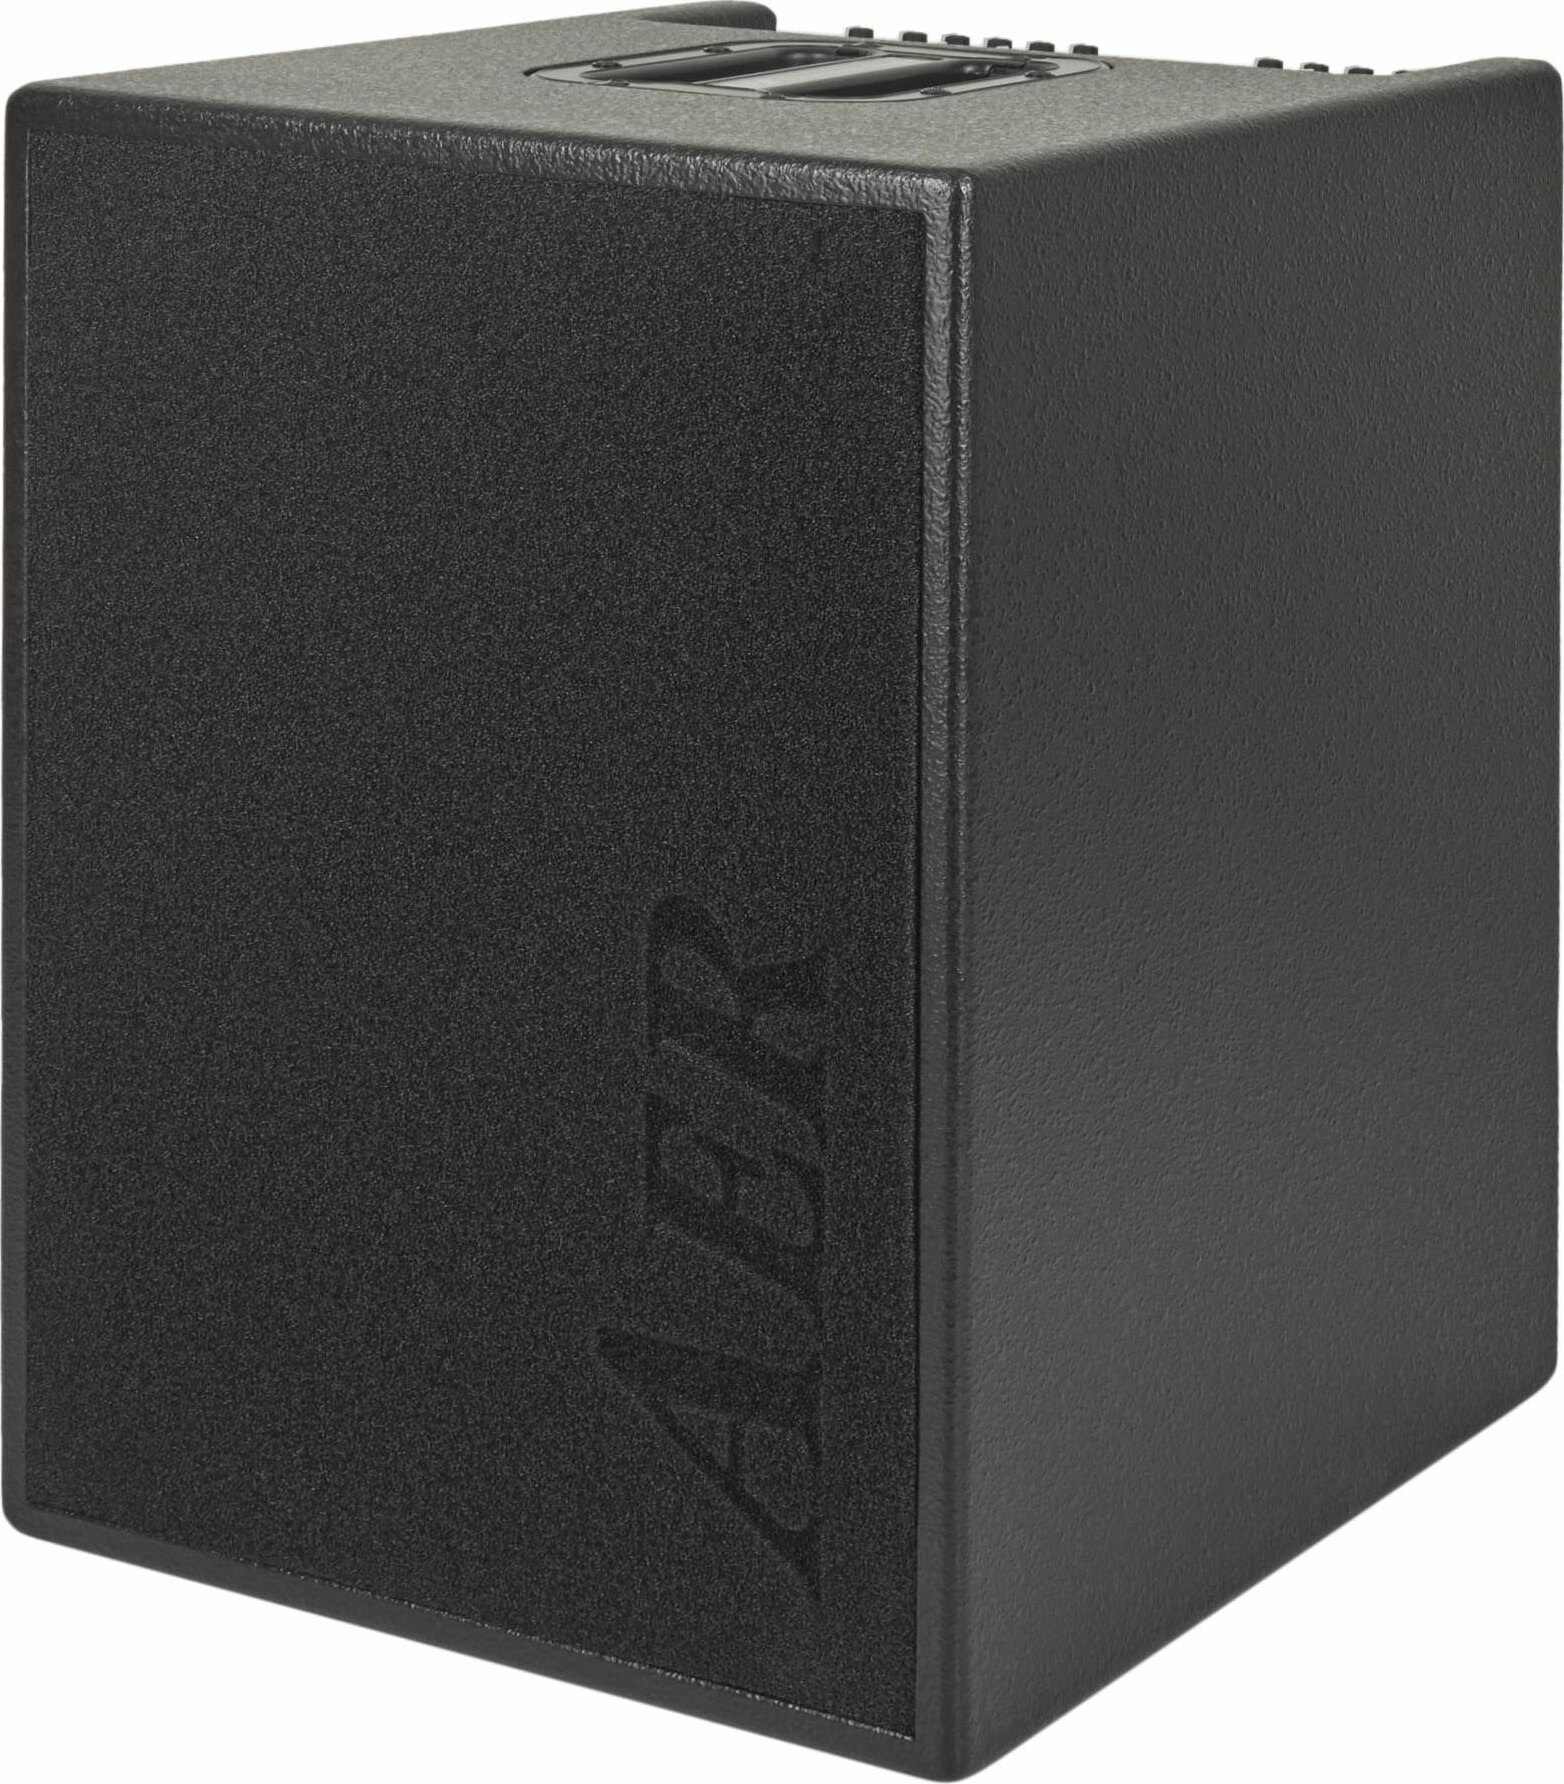 Aer Basic Performer 2 200w 4x8 Black +housse - Bass Combo - Main picture